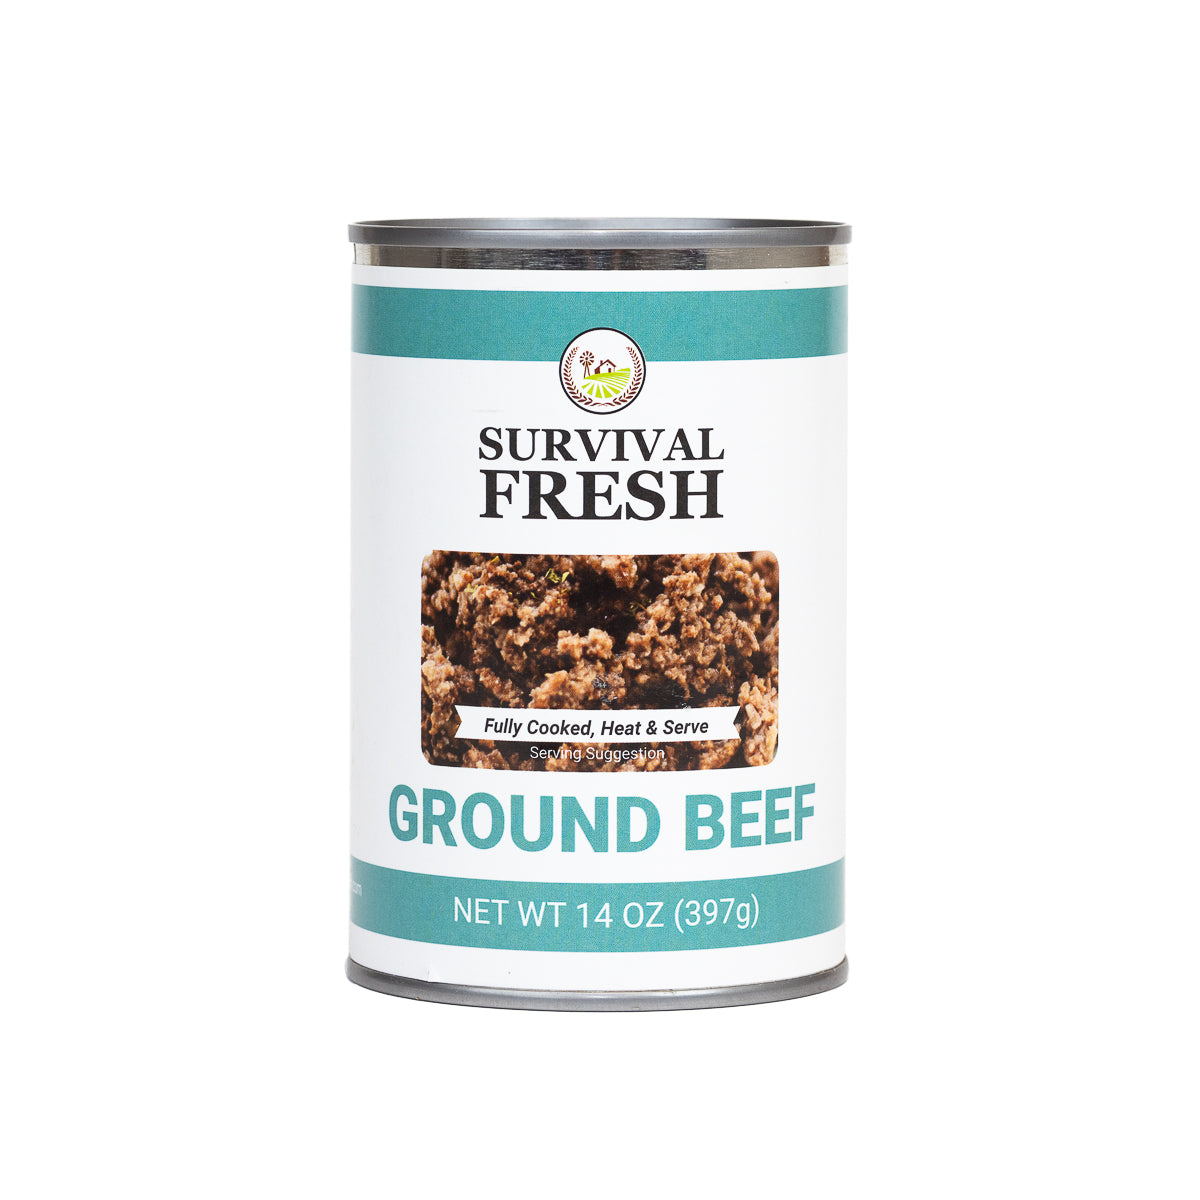 Ground Beef Canned Meat